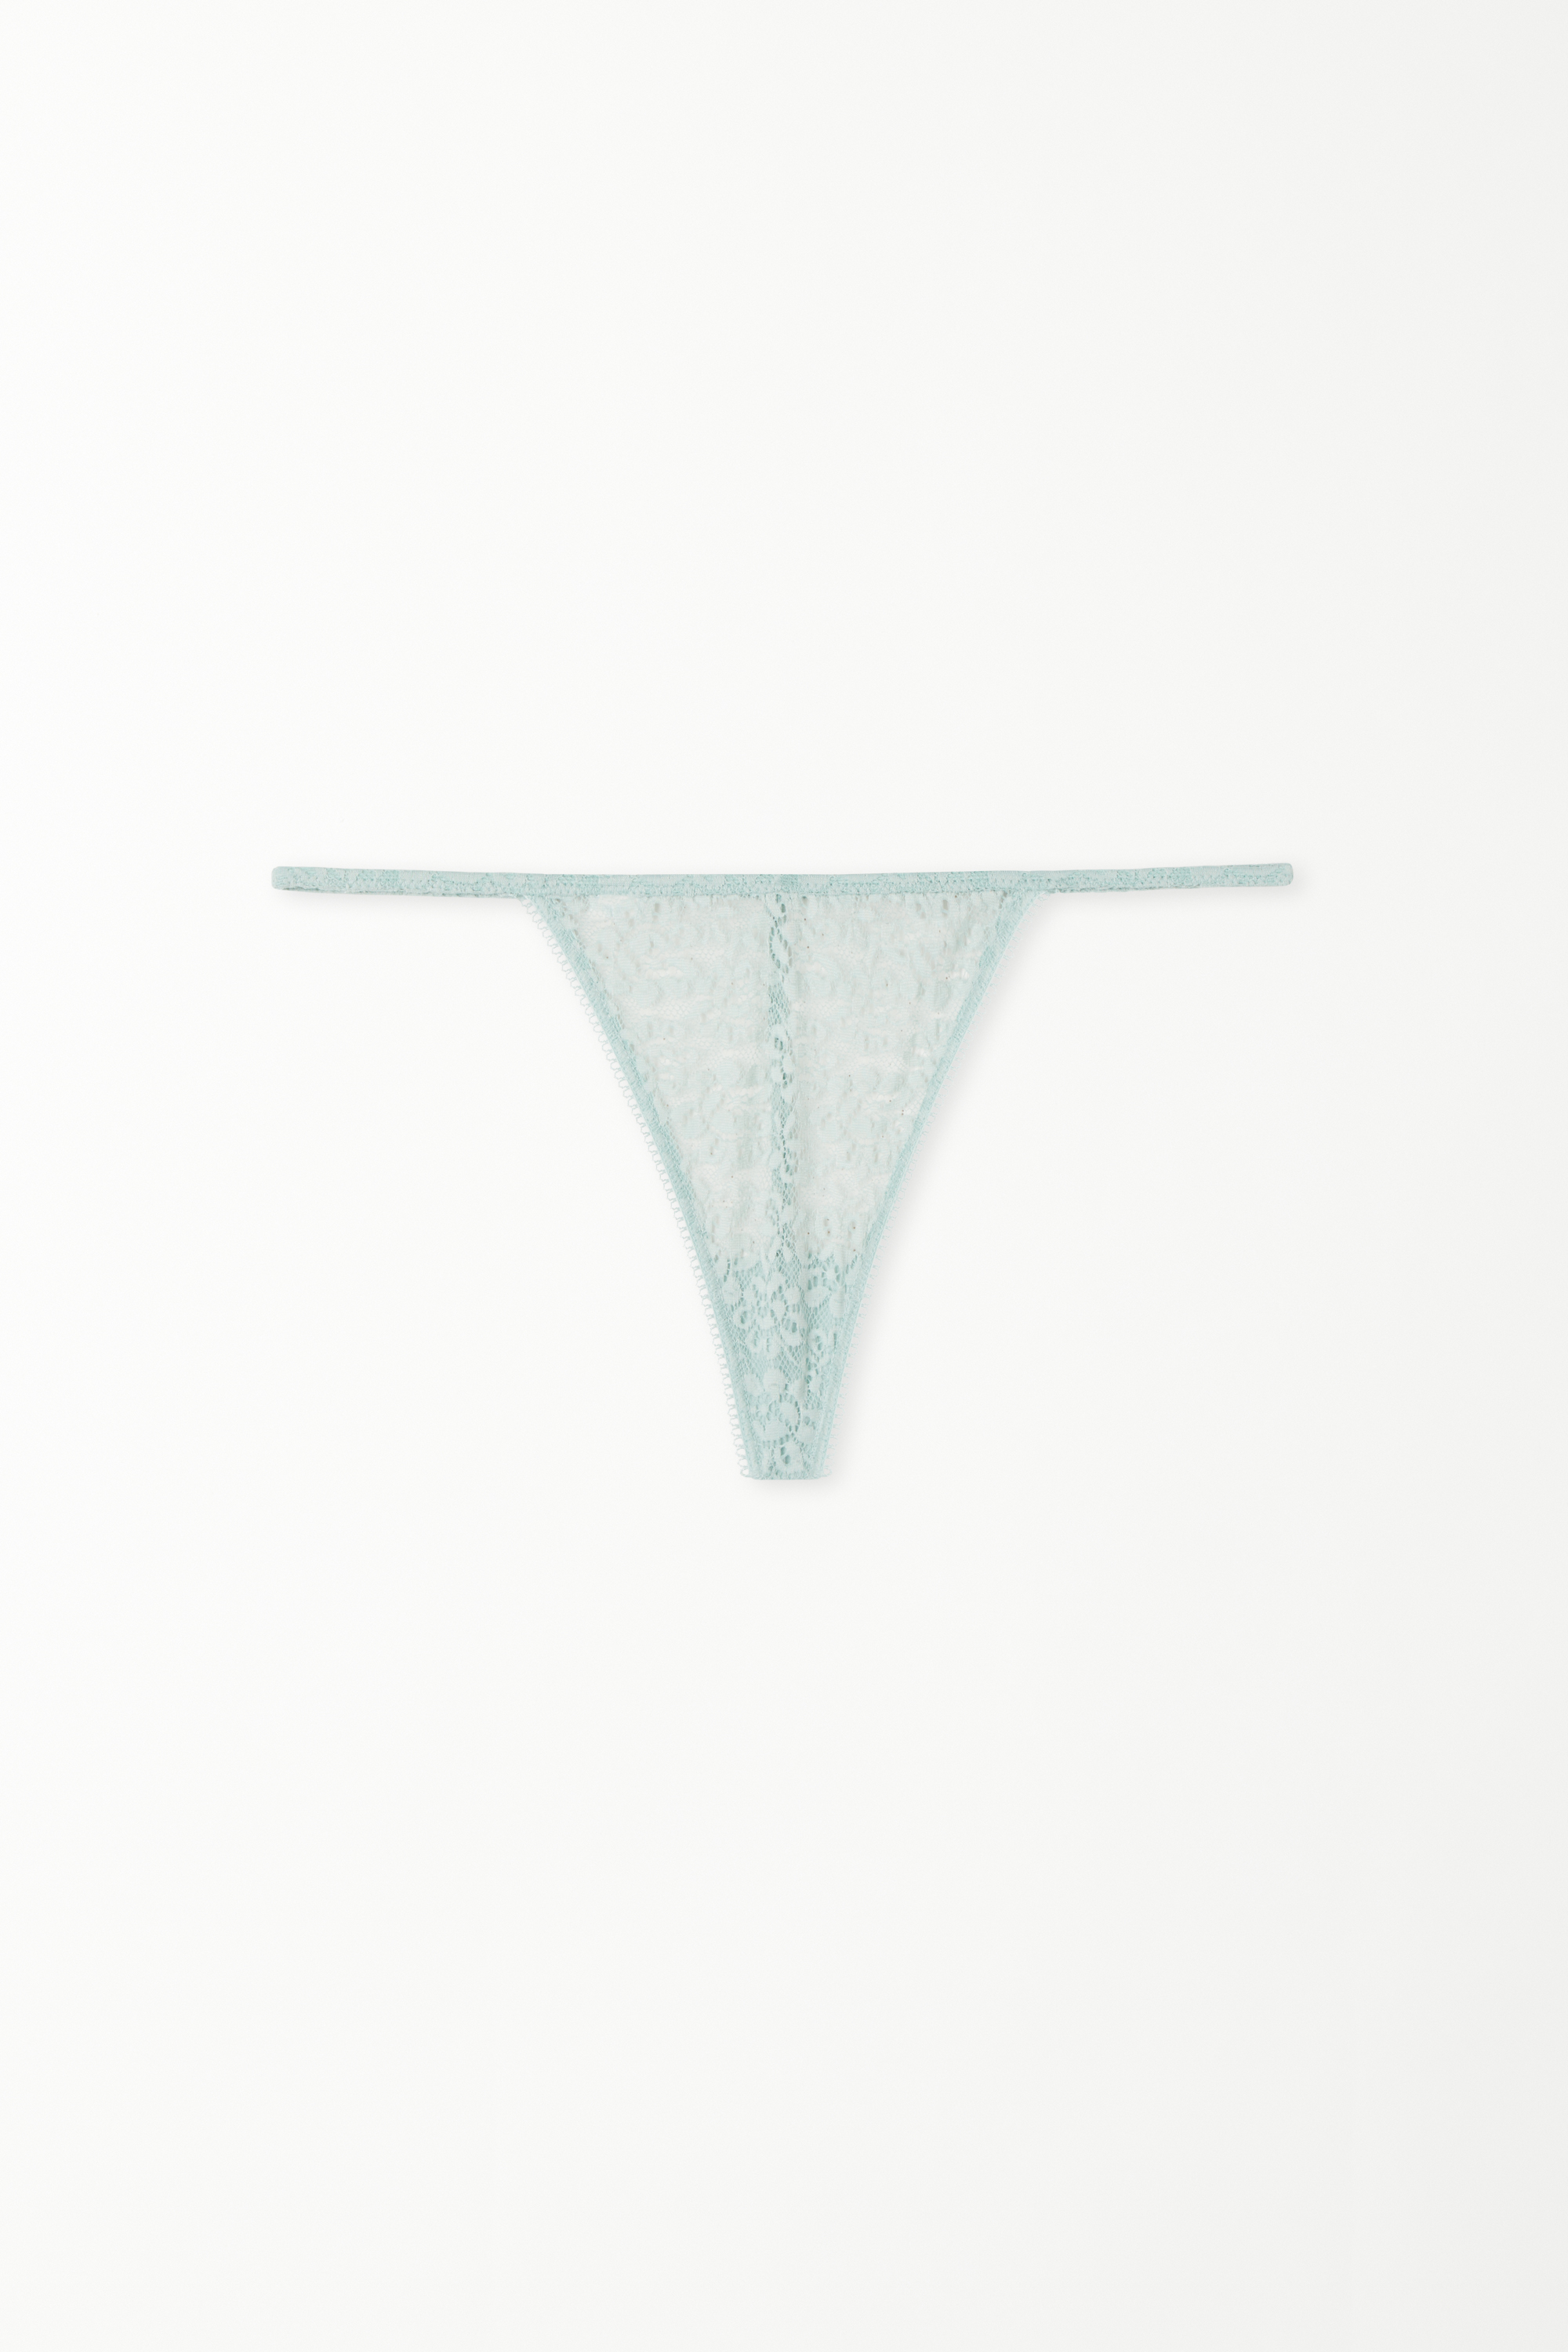 G-String with Thin Tanga-Style Panel in Recycled Lace